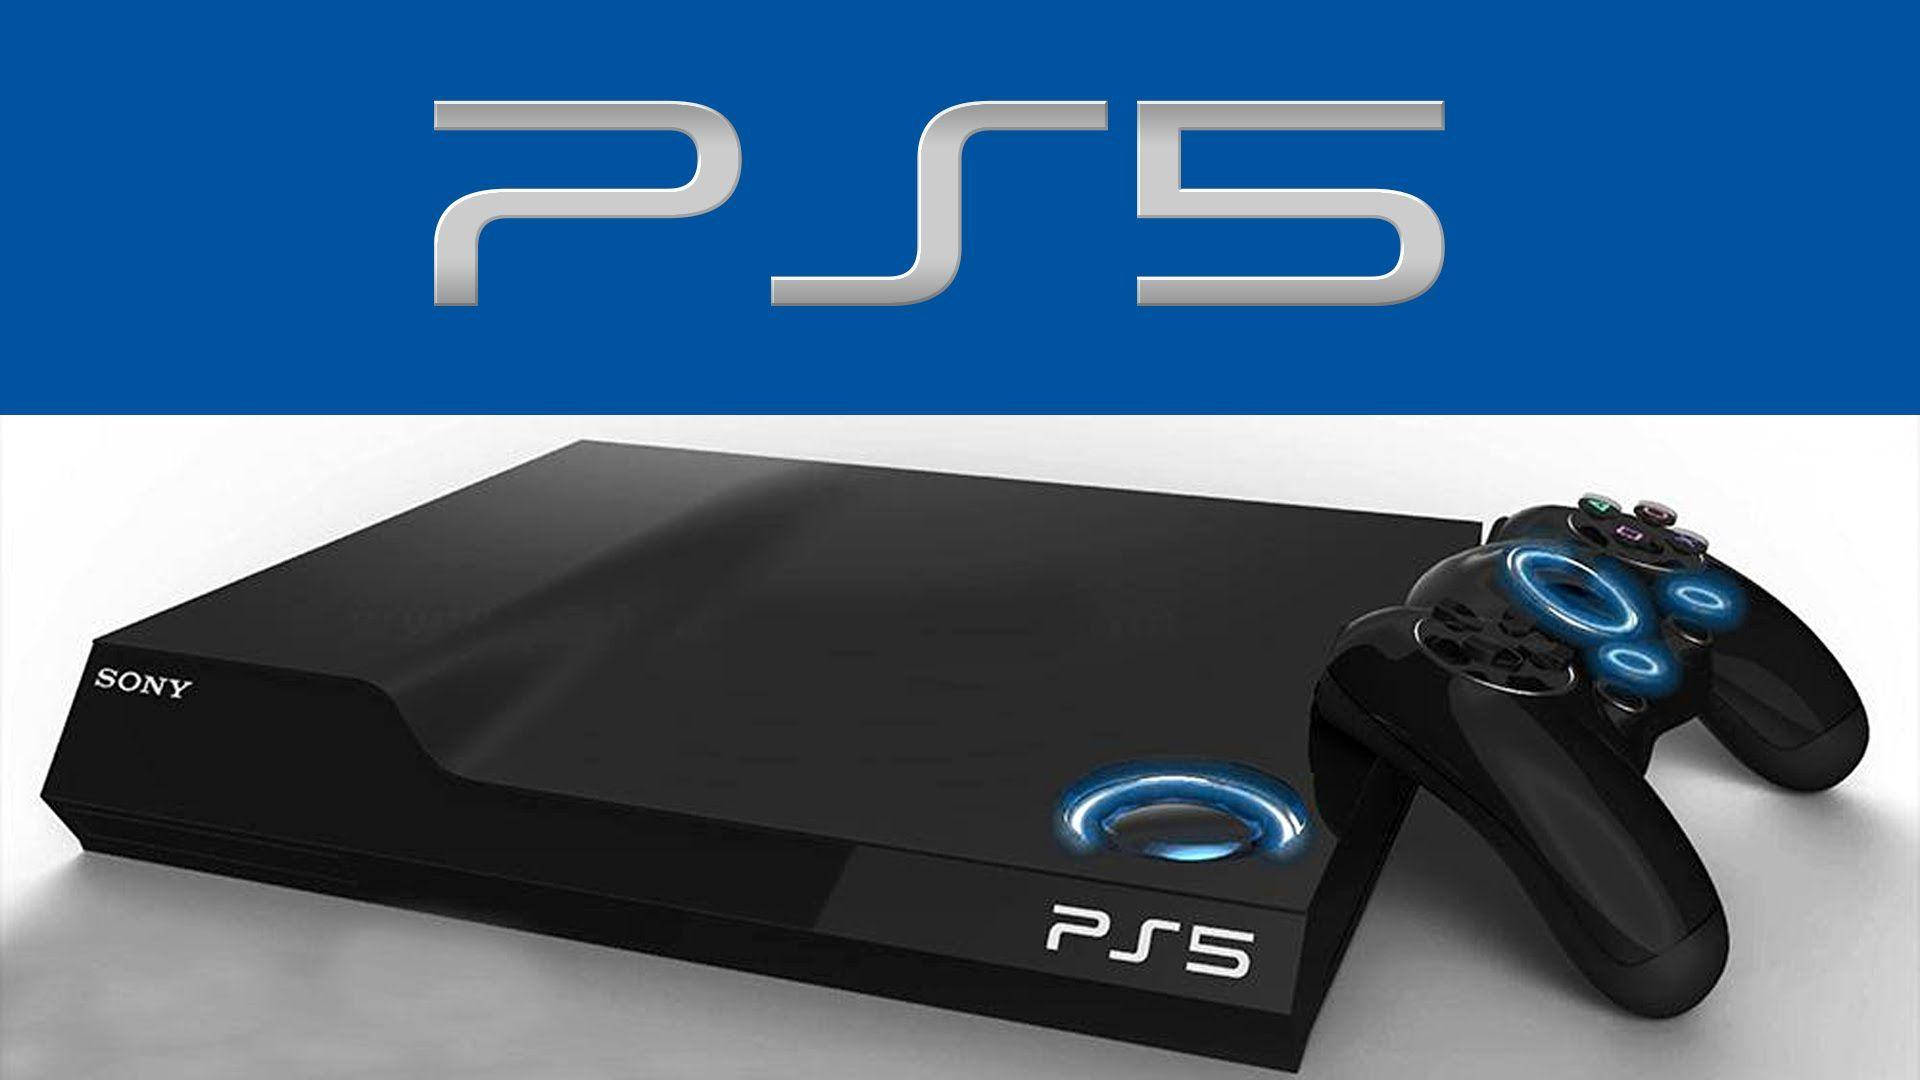 PS5 Home Video Game Console Wallpaper